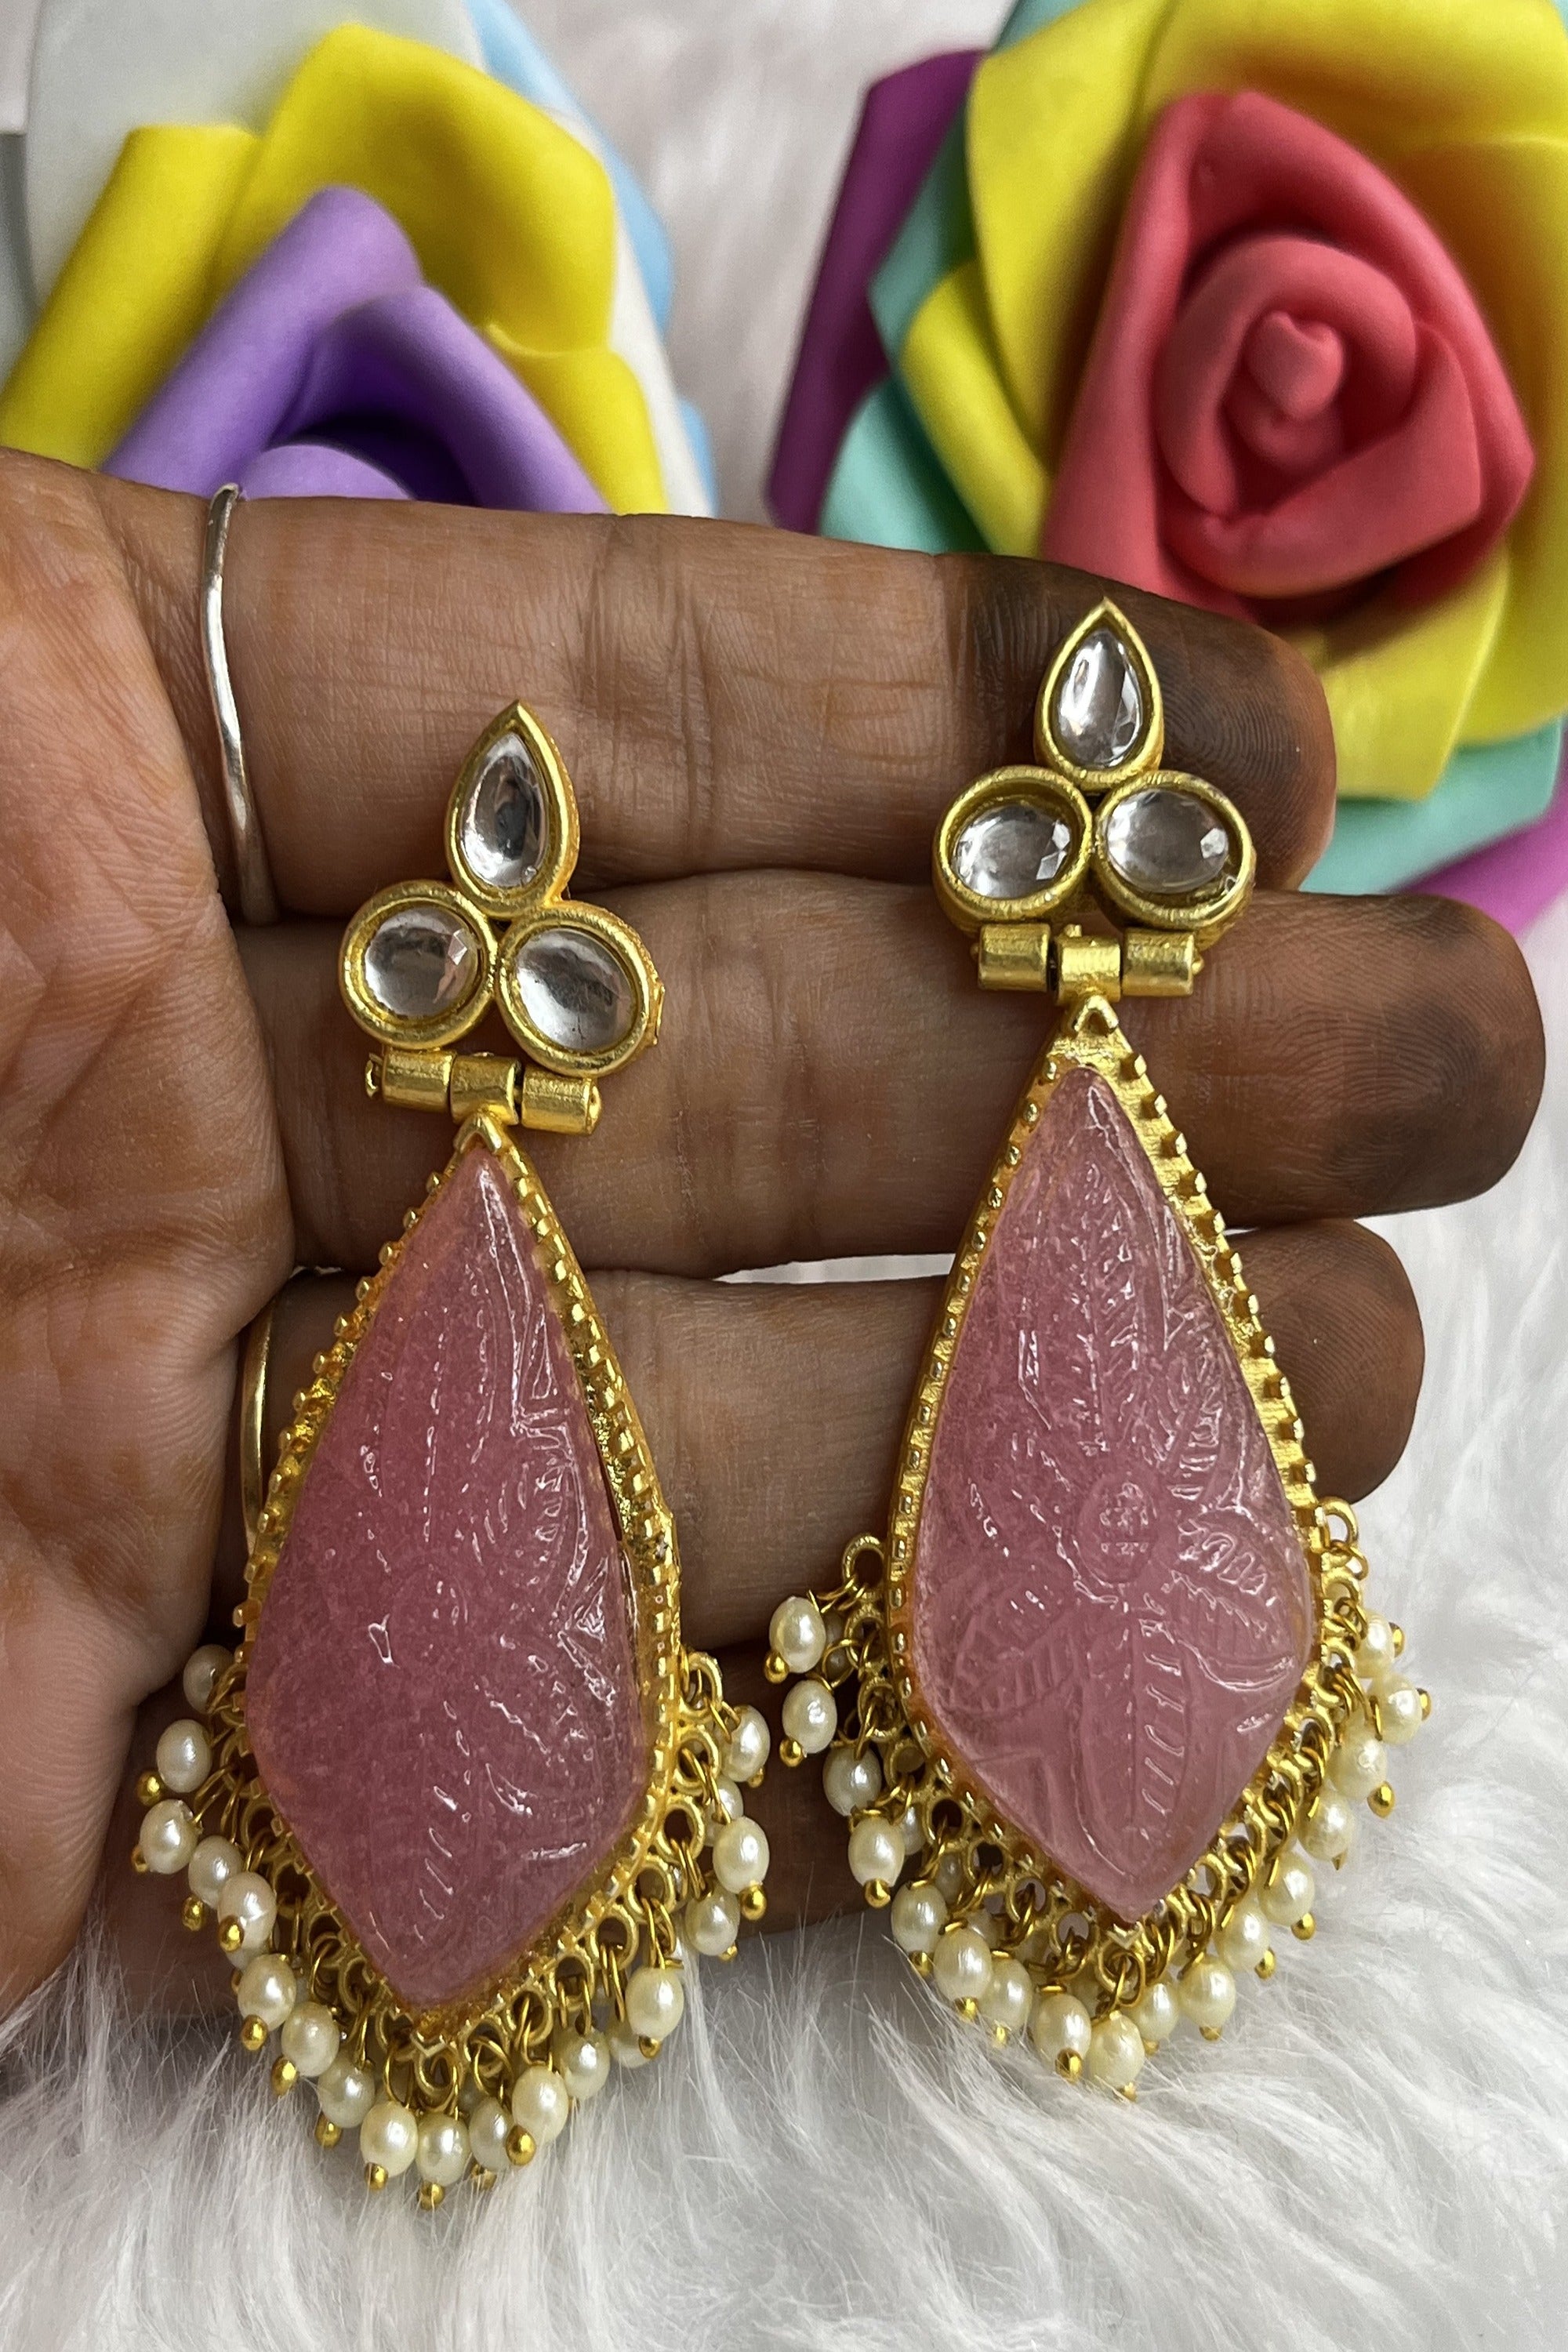 Pin by Reshma chhabria on gift earrings | Carved stone jewelry, Unique  diamond earrings, Real diamond earrings